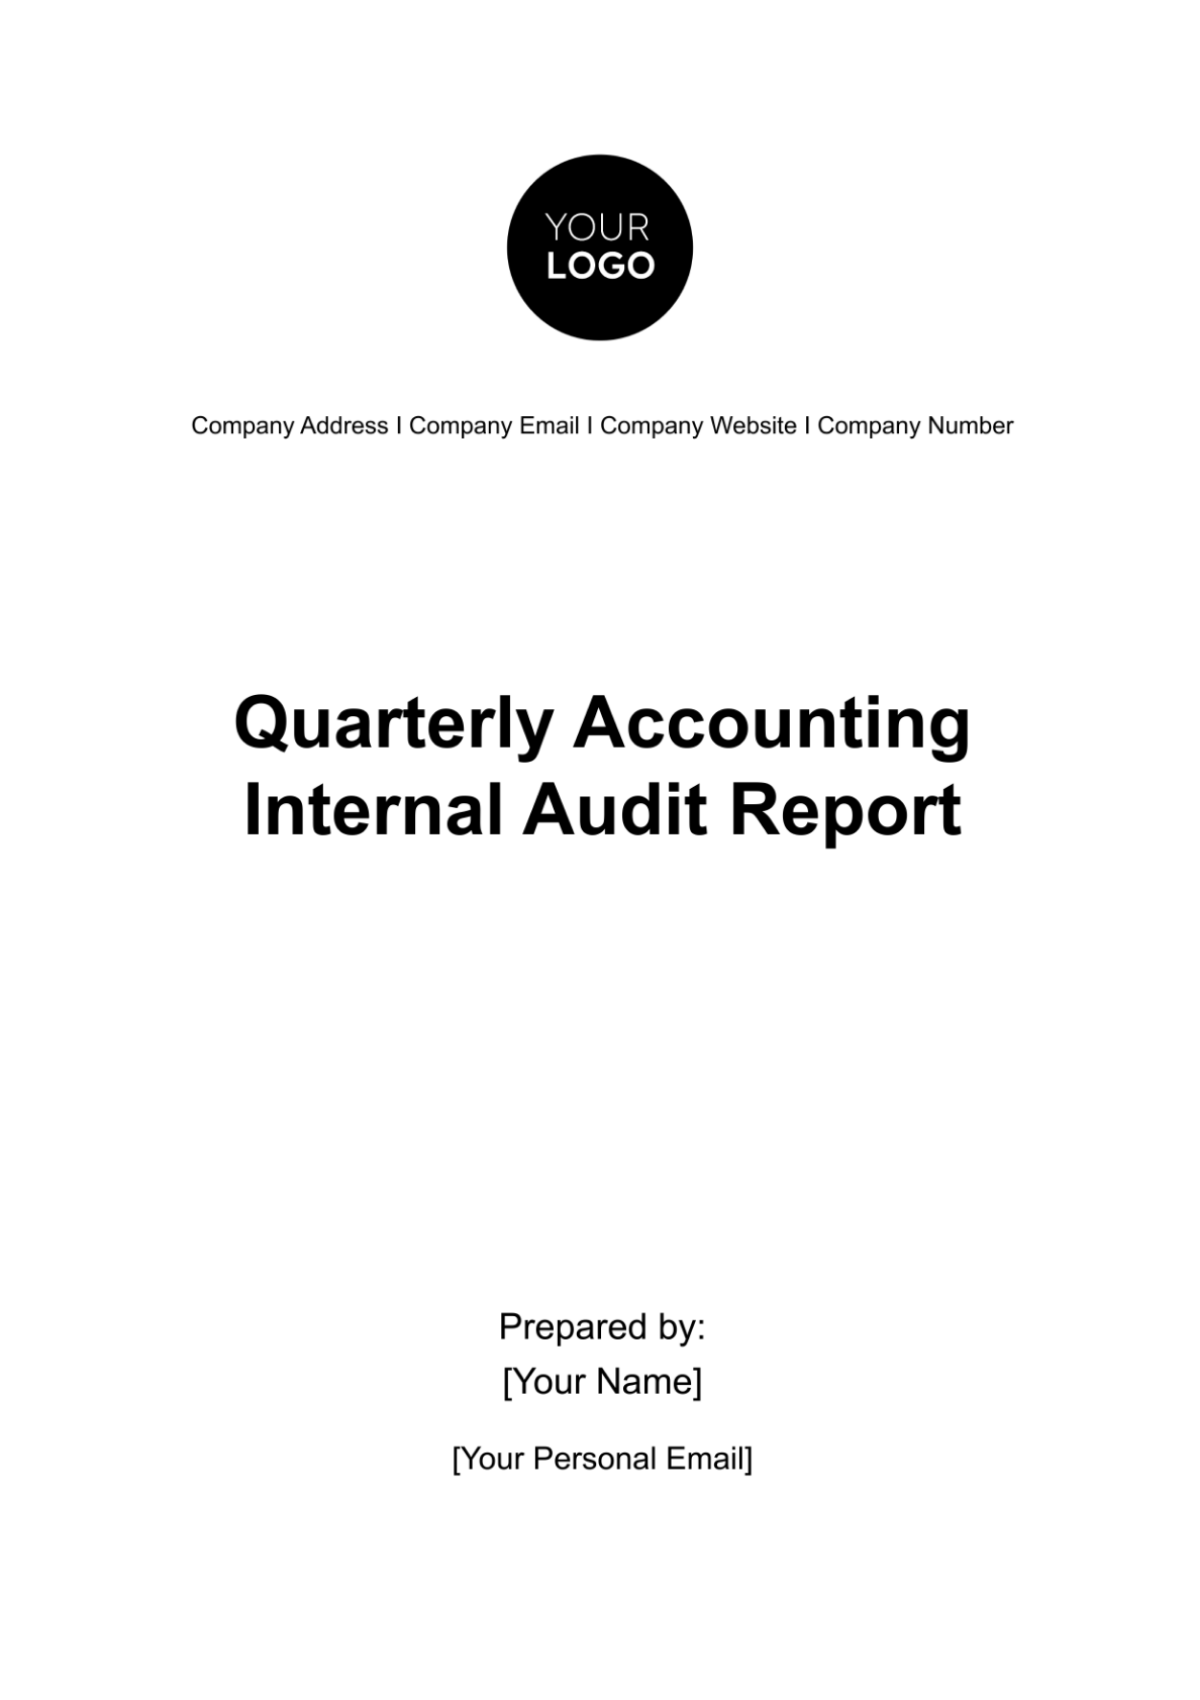 Free Quarterly Accounting Internal Audit Report Template